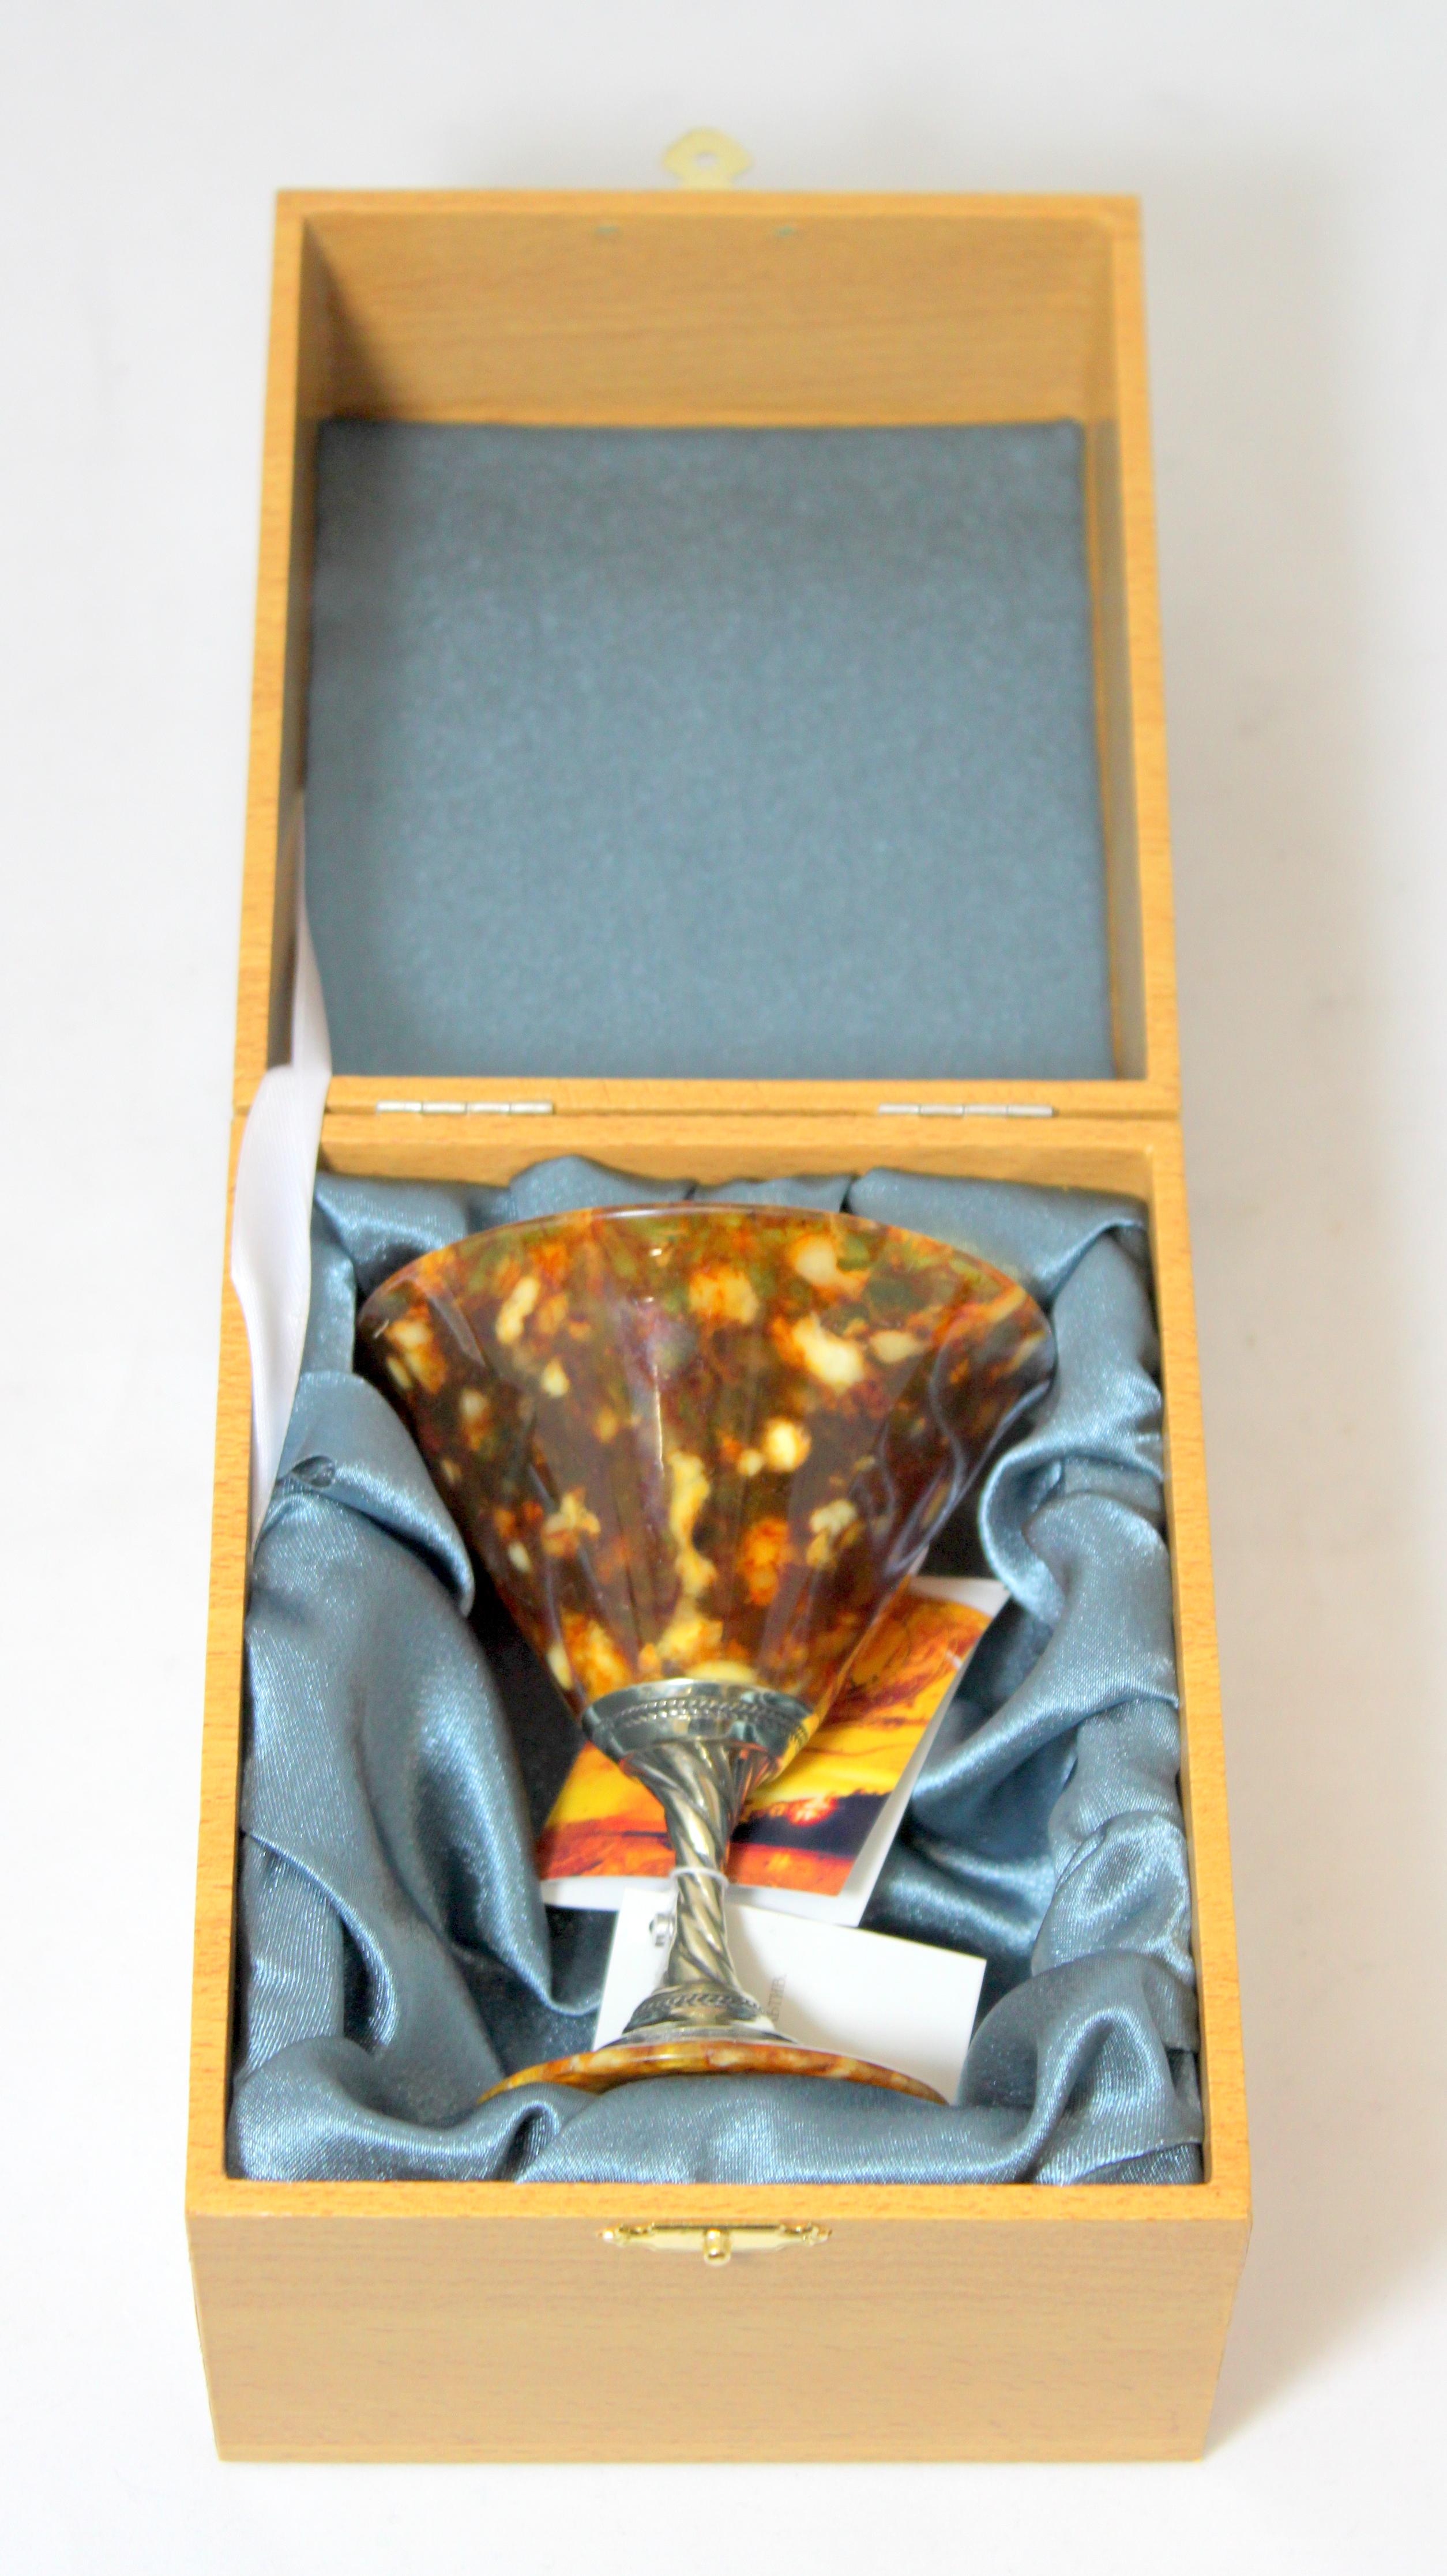 Vintage Russian silver and amber small goblet
Made in Russia, circa 1990s
Fully hallmarked

Dimensions:
diameter x height 8.8 x 10.2 cm
weight 69 grams

Condition: Excellent and pleasant overall condition with no damage, please see